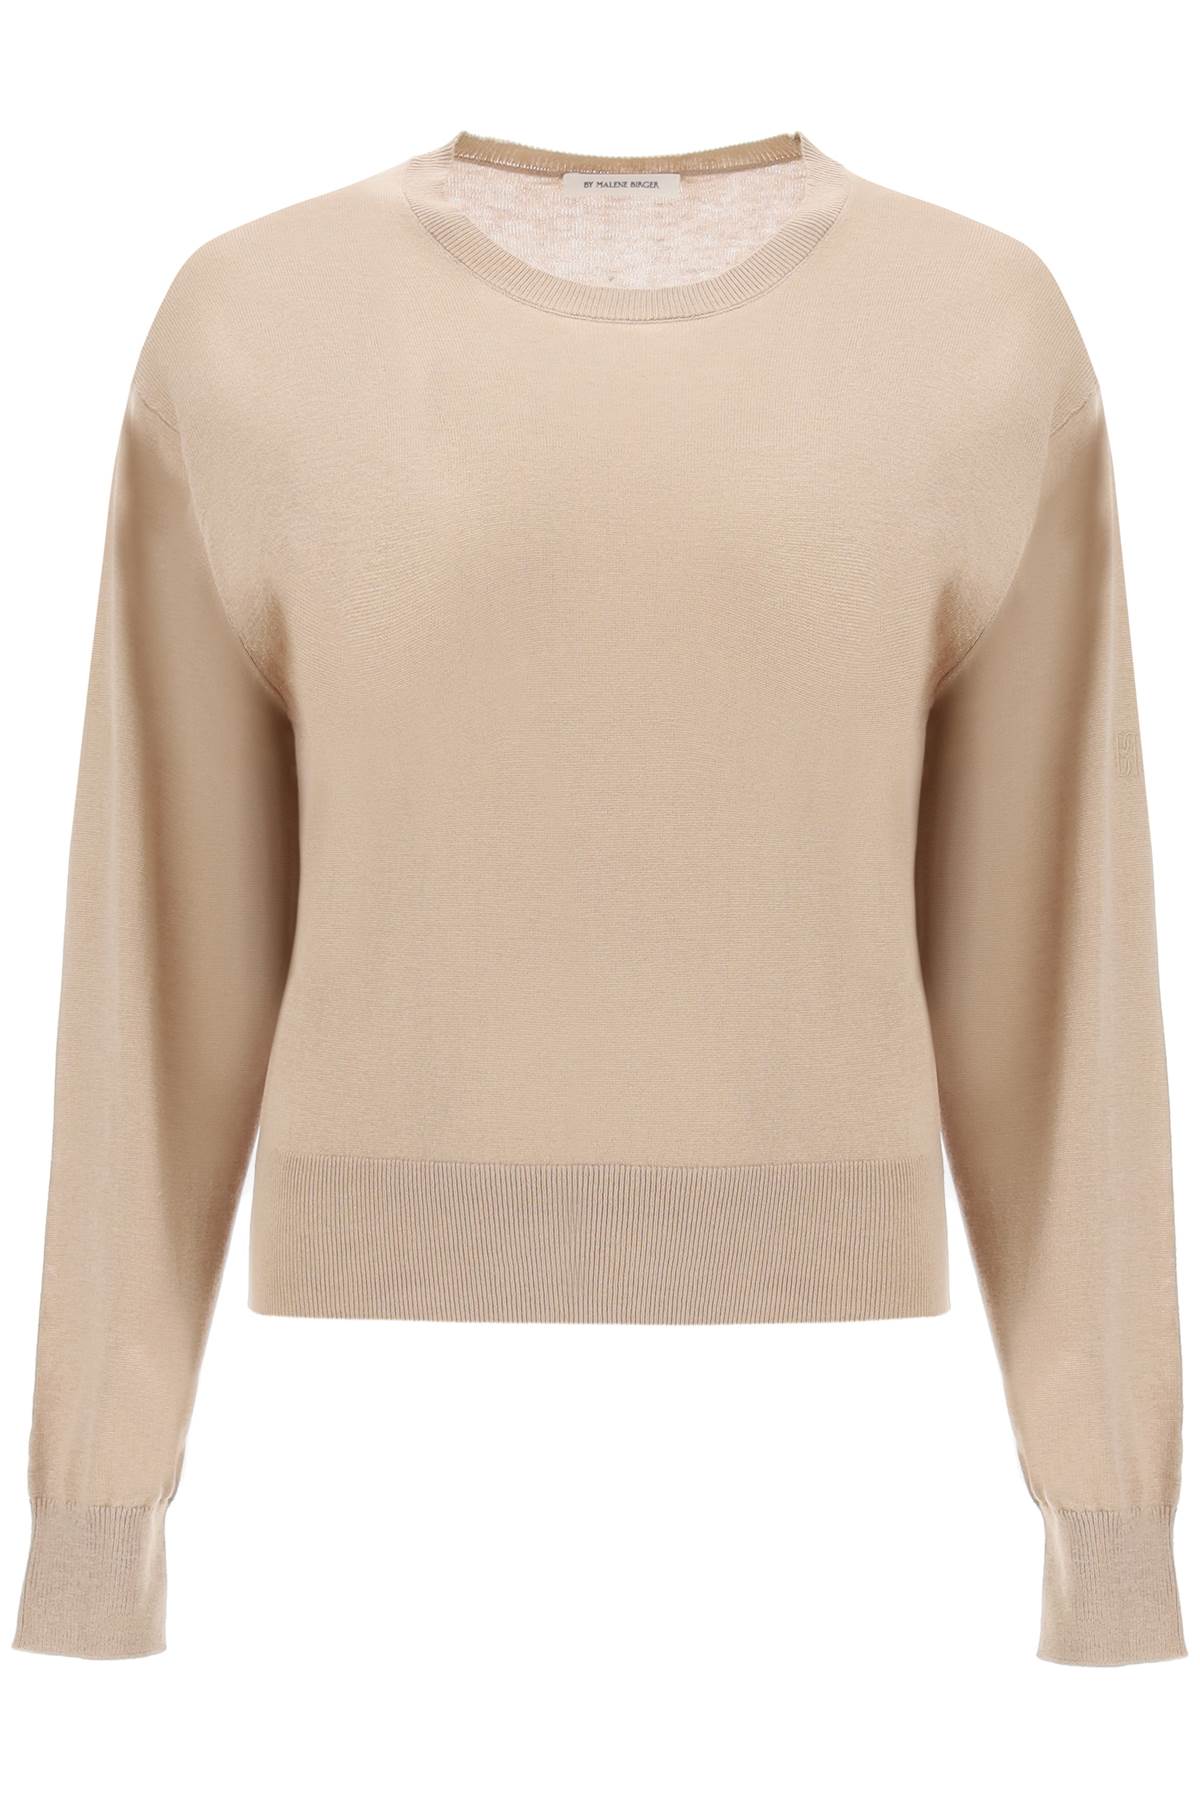 By Malene Birger BY MALENE BIRGER wool and silk blend pullover sweater by